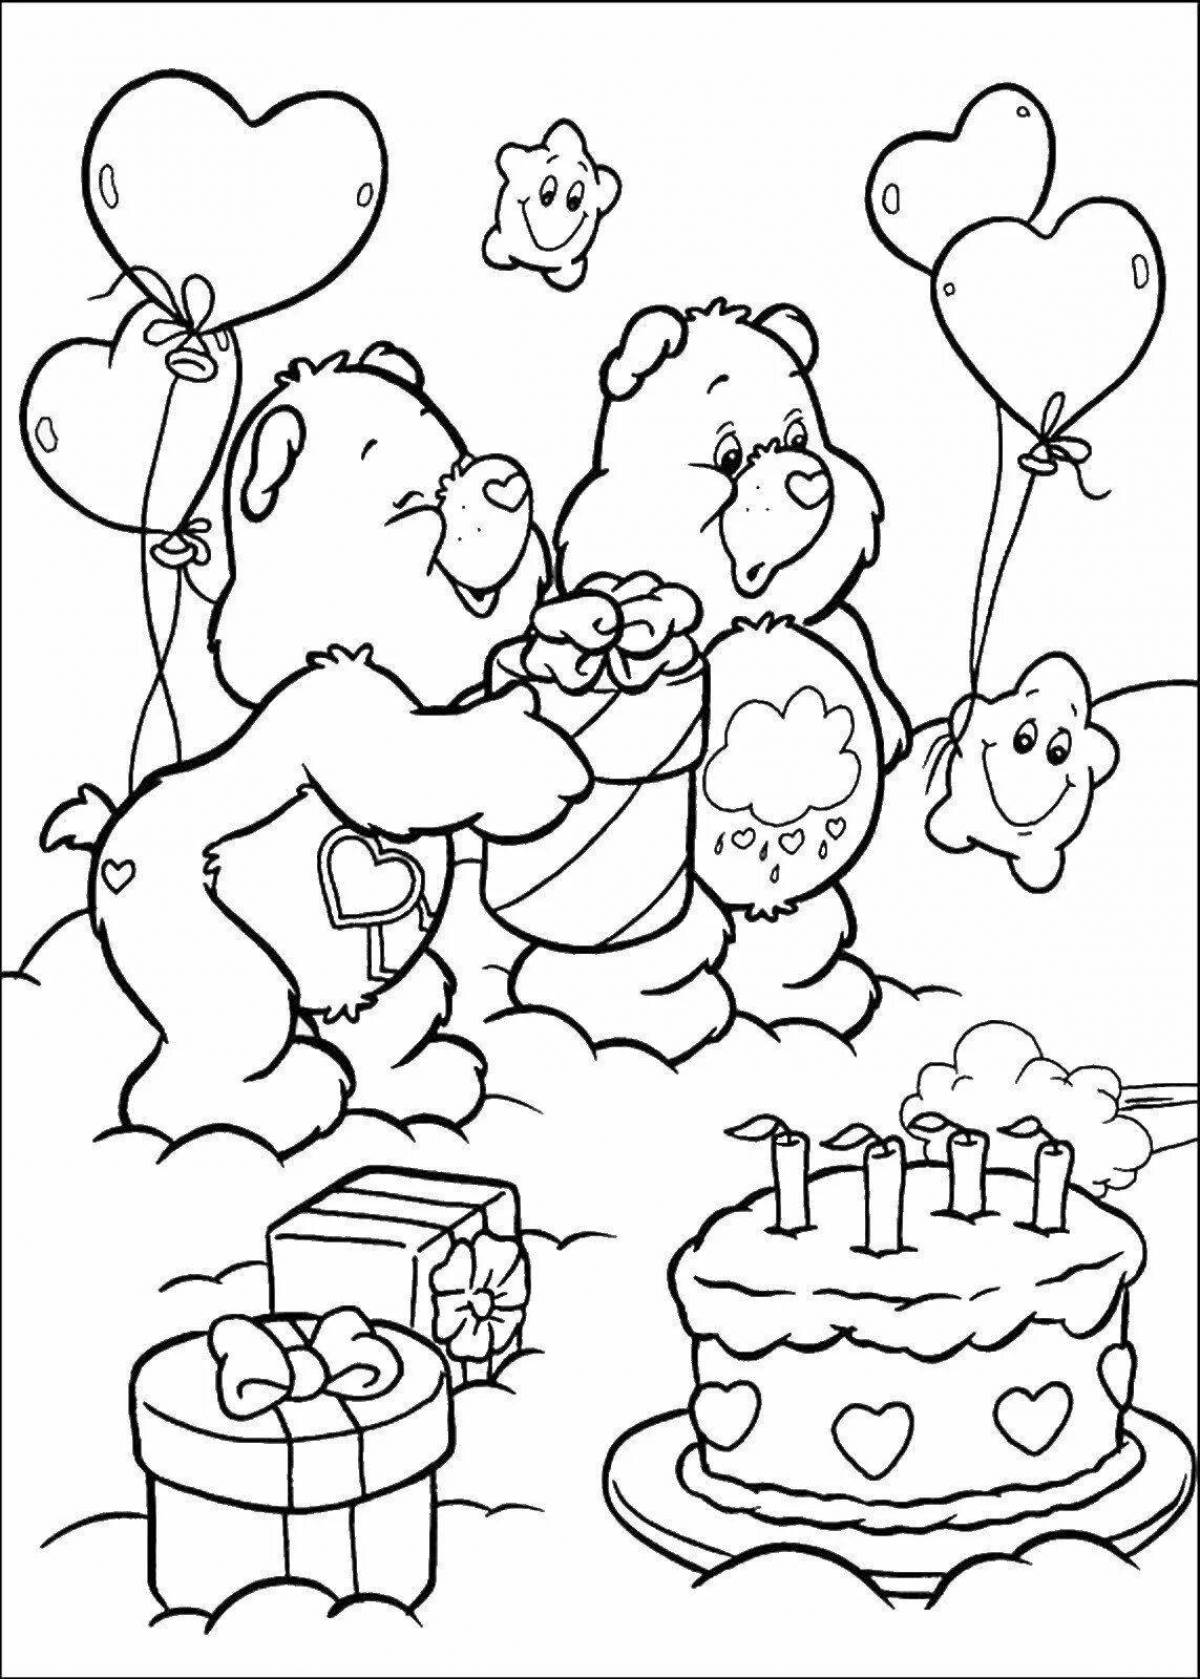 Exquisite grandfather birthday coloring book from granddaughter